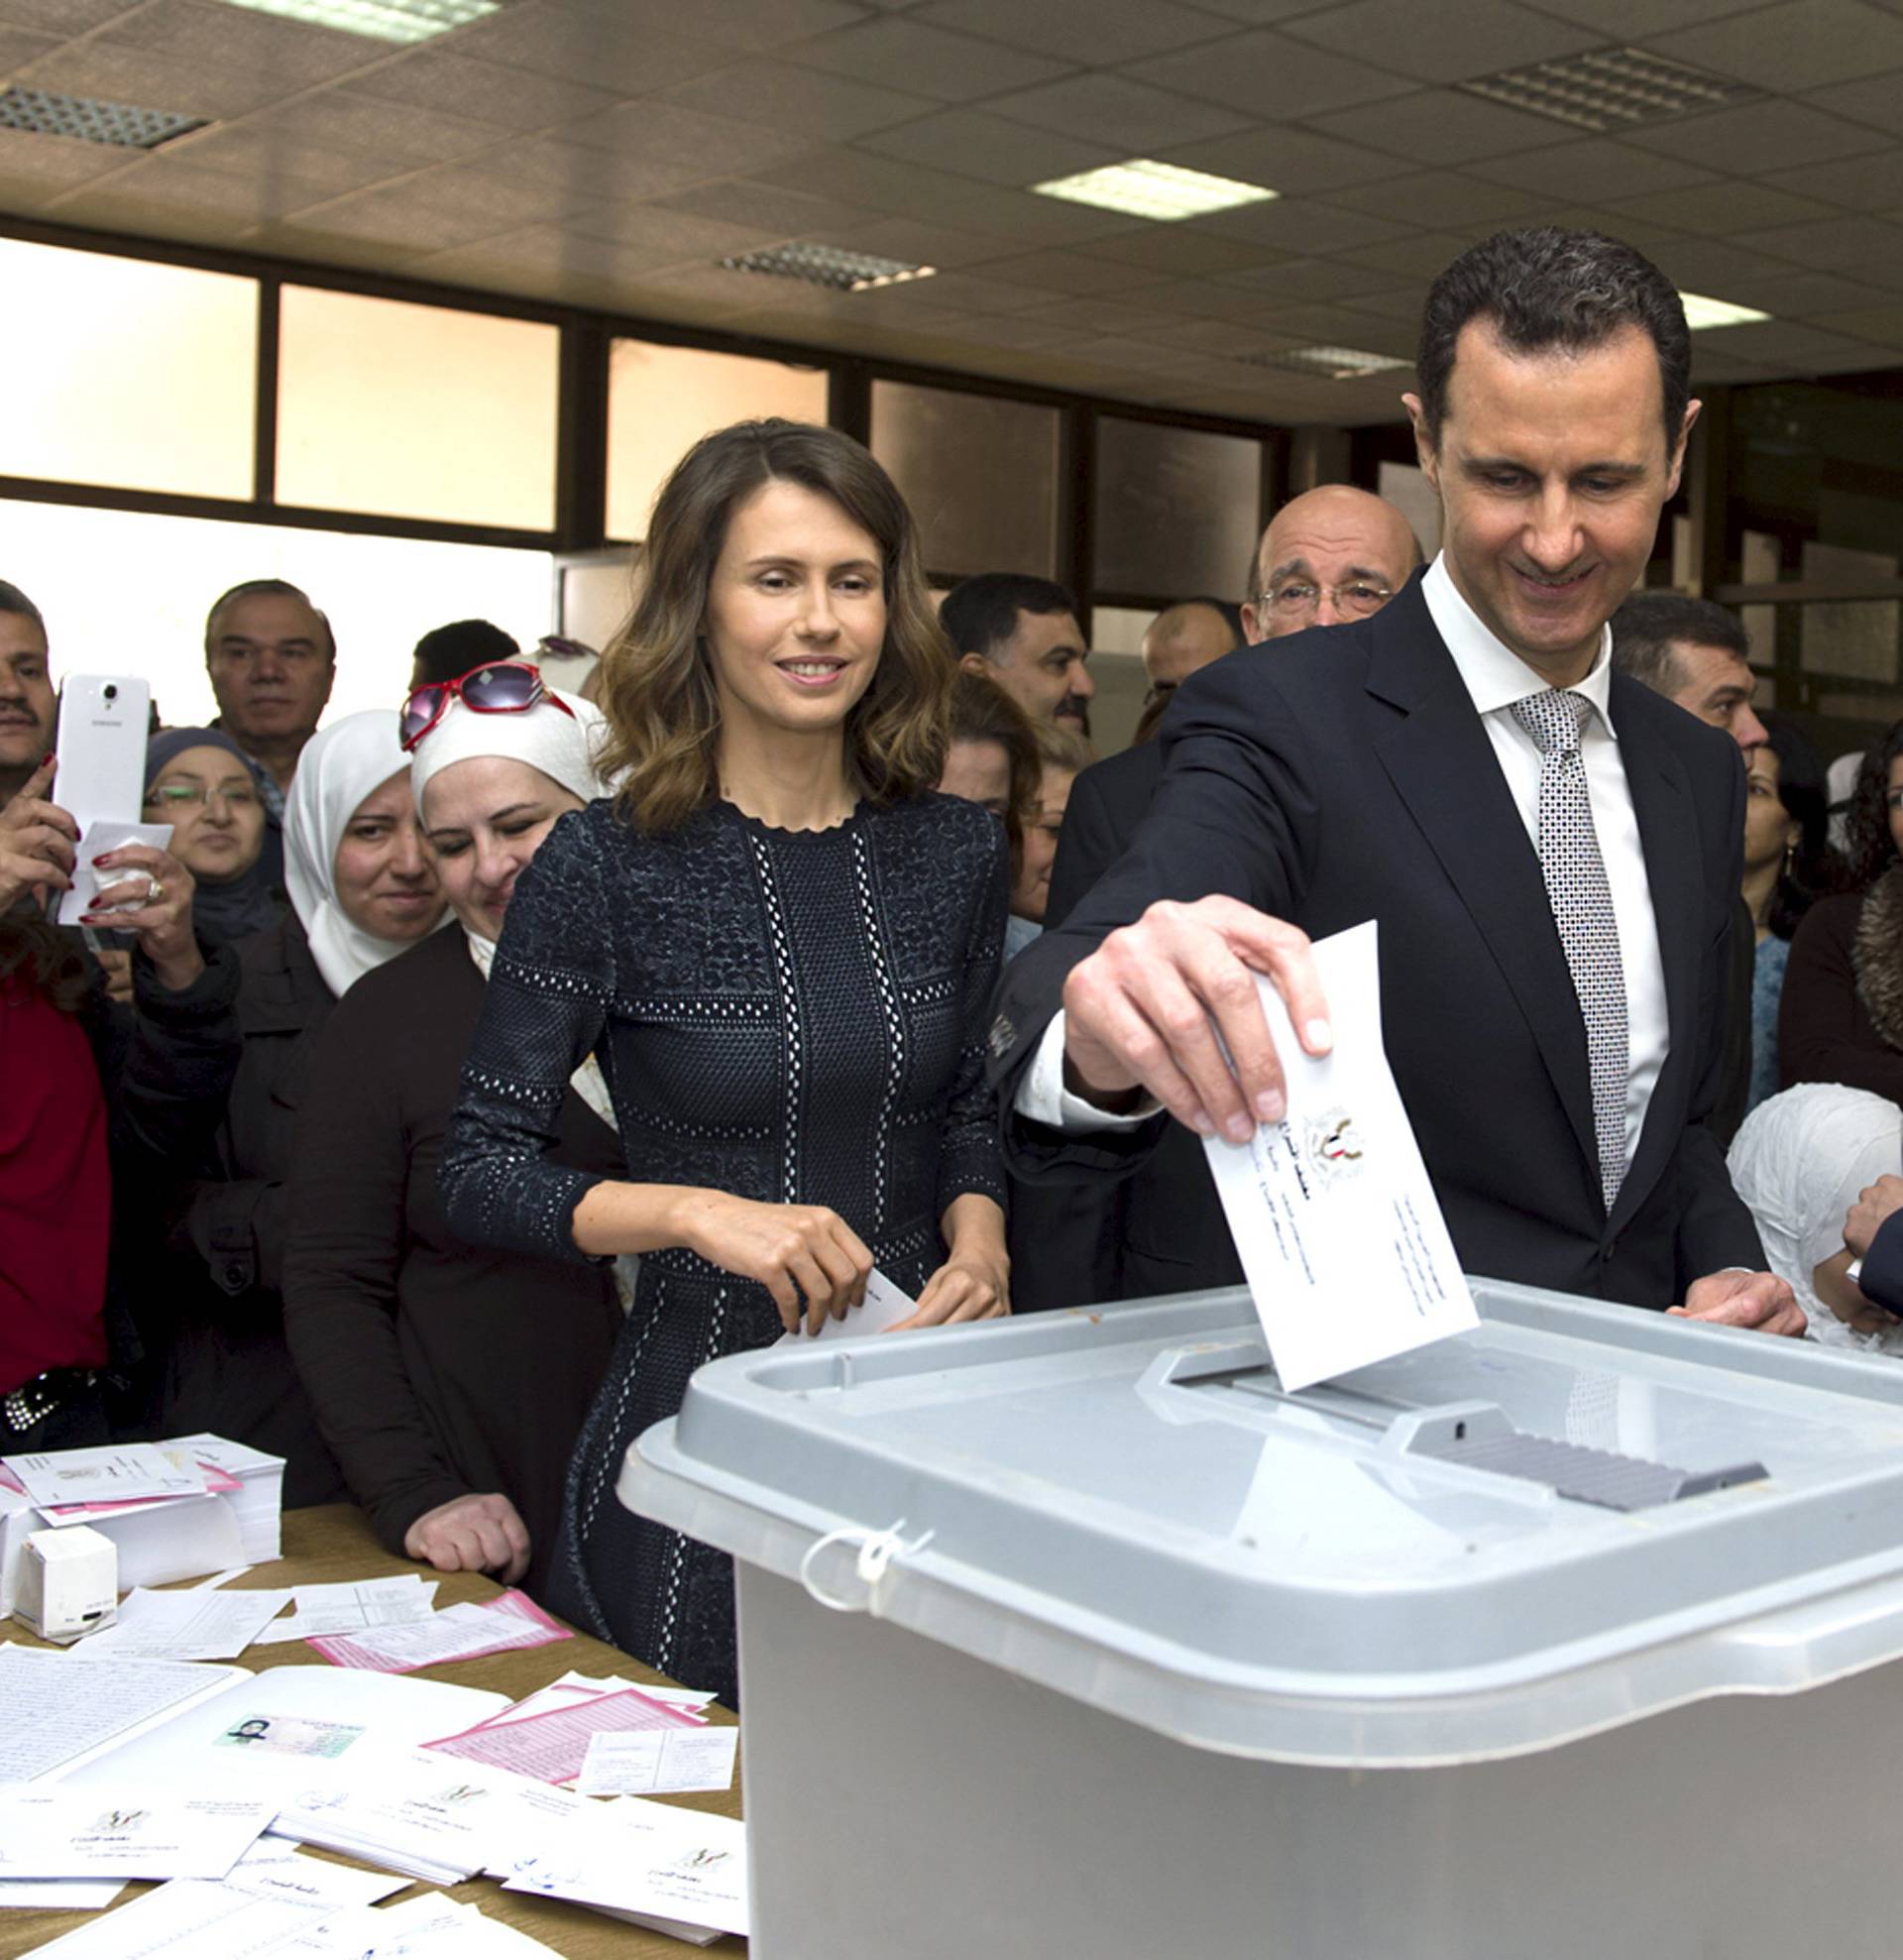 Syria's President Bashar al-Assad casts his vote next to his wife Asma inside a polling station during the parliamentary elections in Damascus